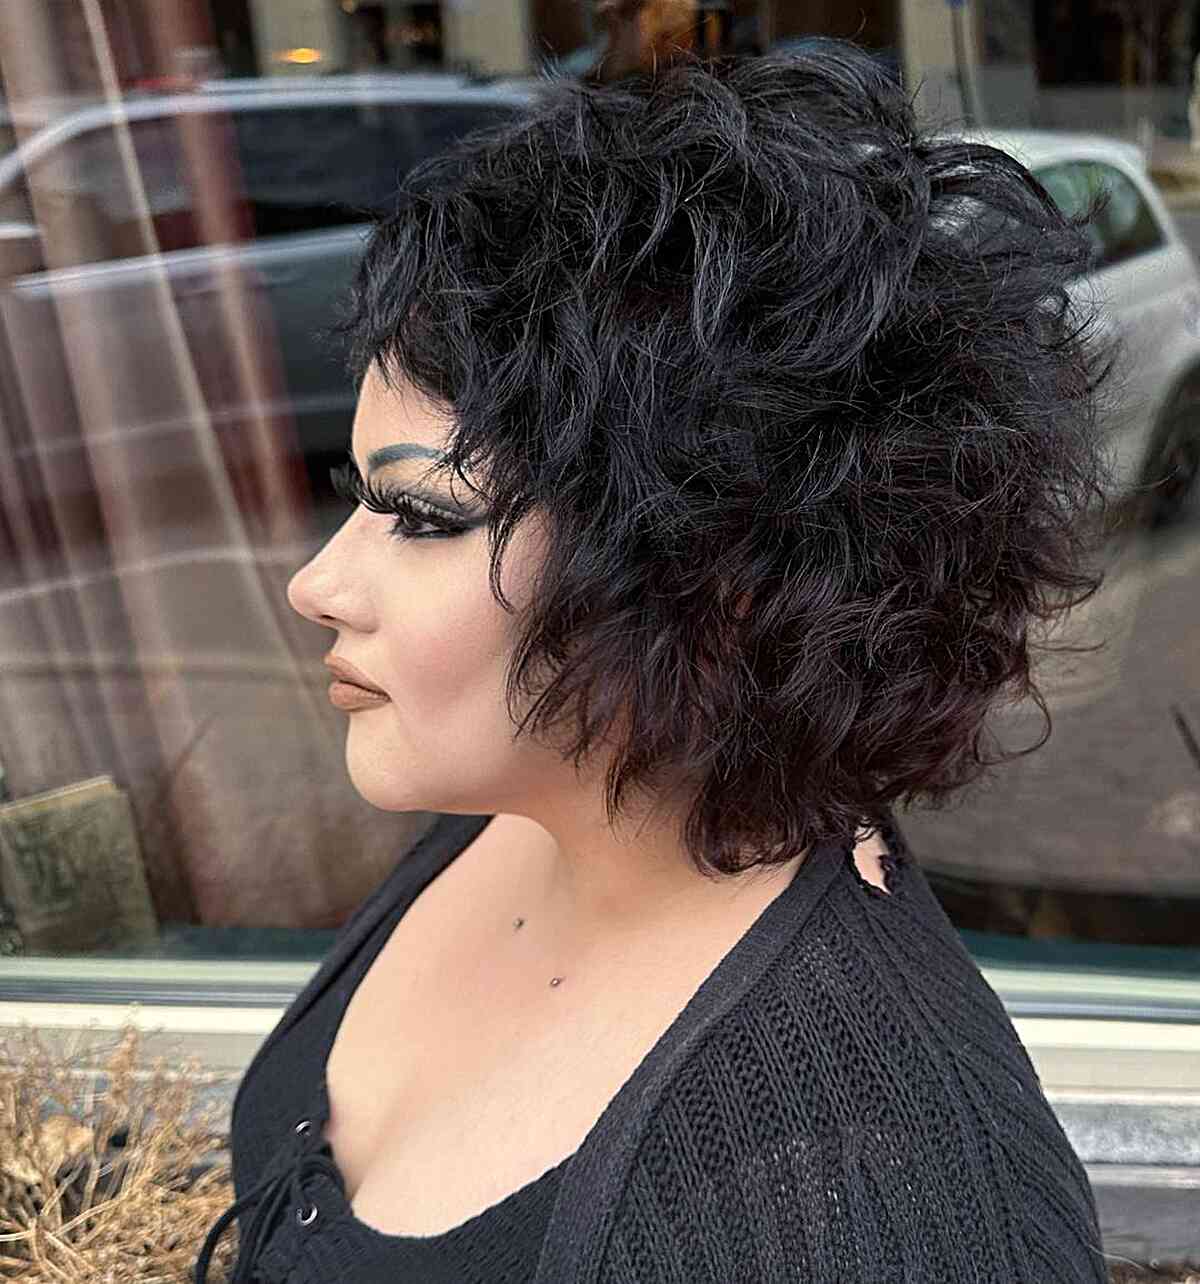 Textured Shag with Natural Curls for ladies with an edgy style